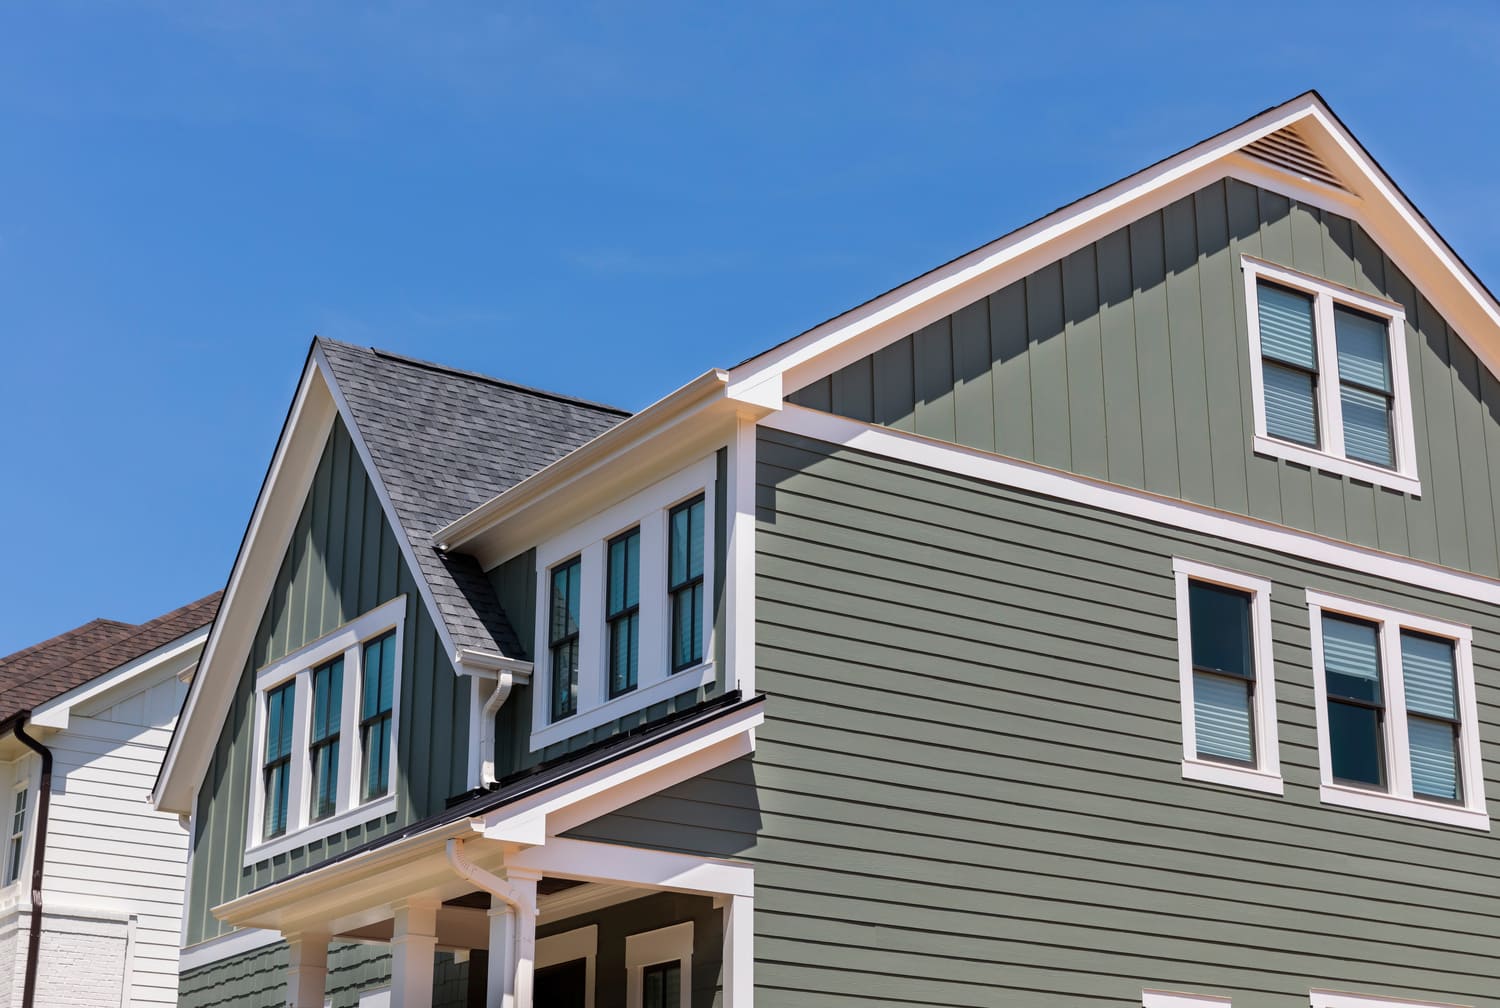 Siding Contractors Chicago: Vital Information for Customers